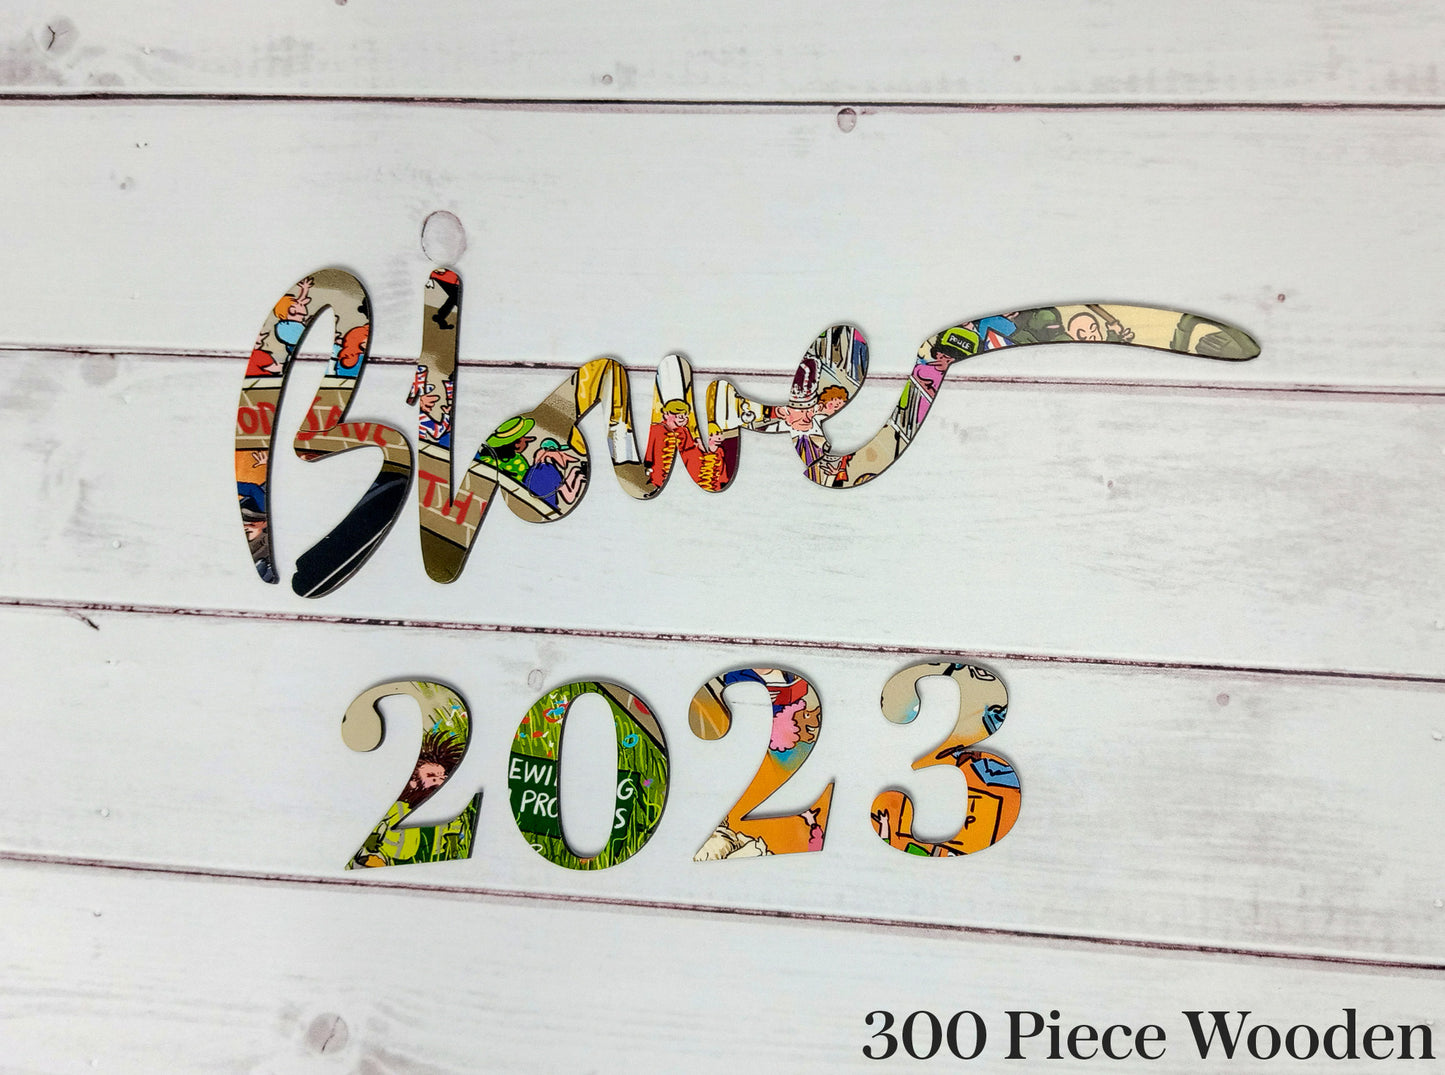 2023 According to Blower 1000 or 300 Piece Jigsaw Puzzle